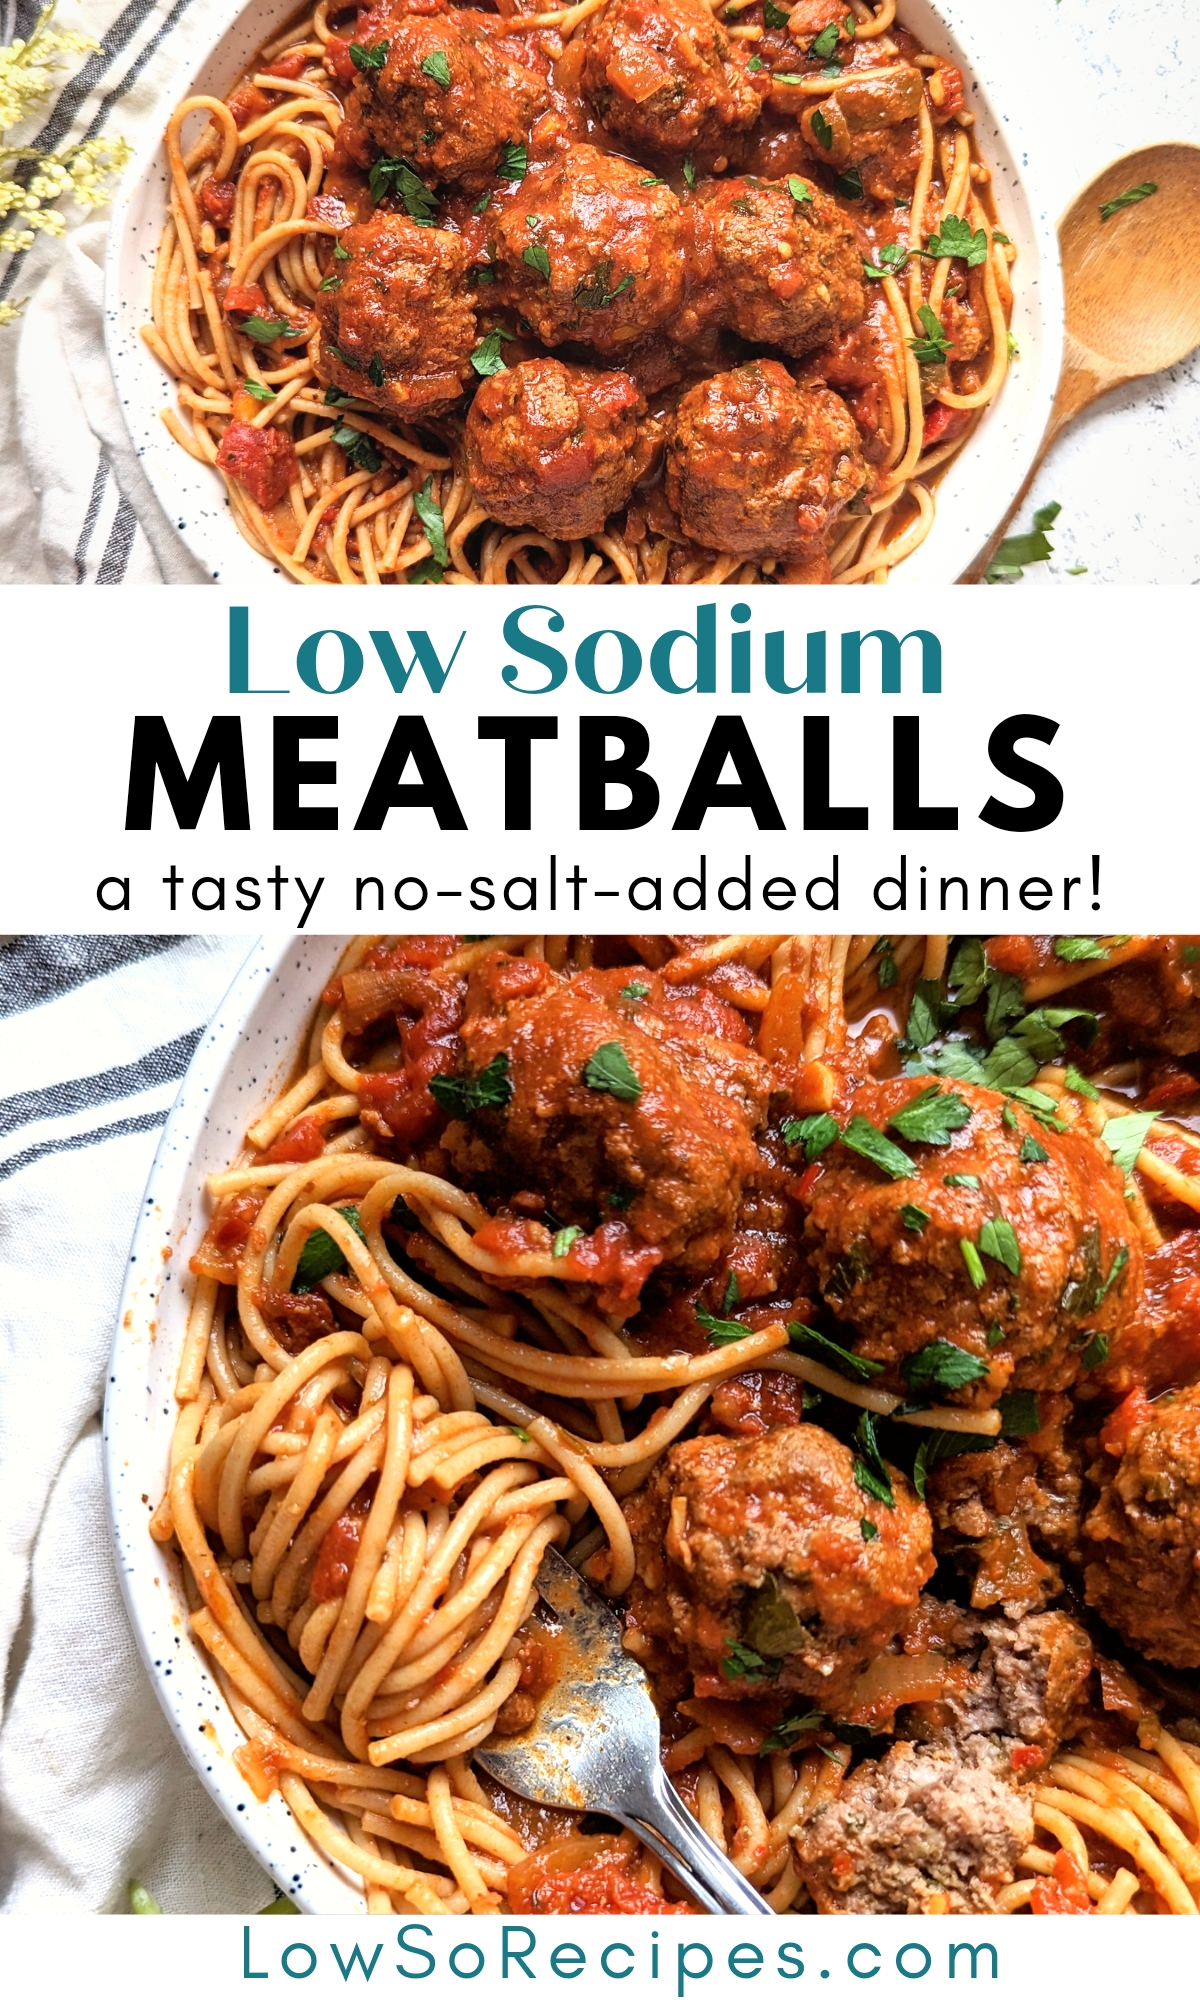 low sodium meatballs recipe no salt added meatballs and pasta dinner ideas without salt